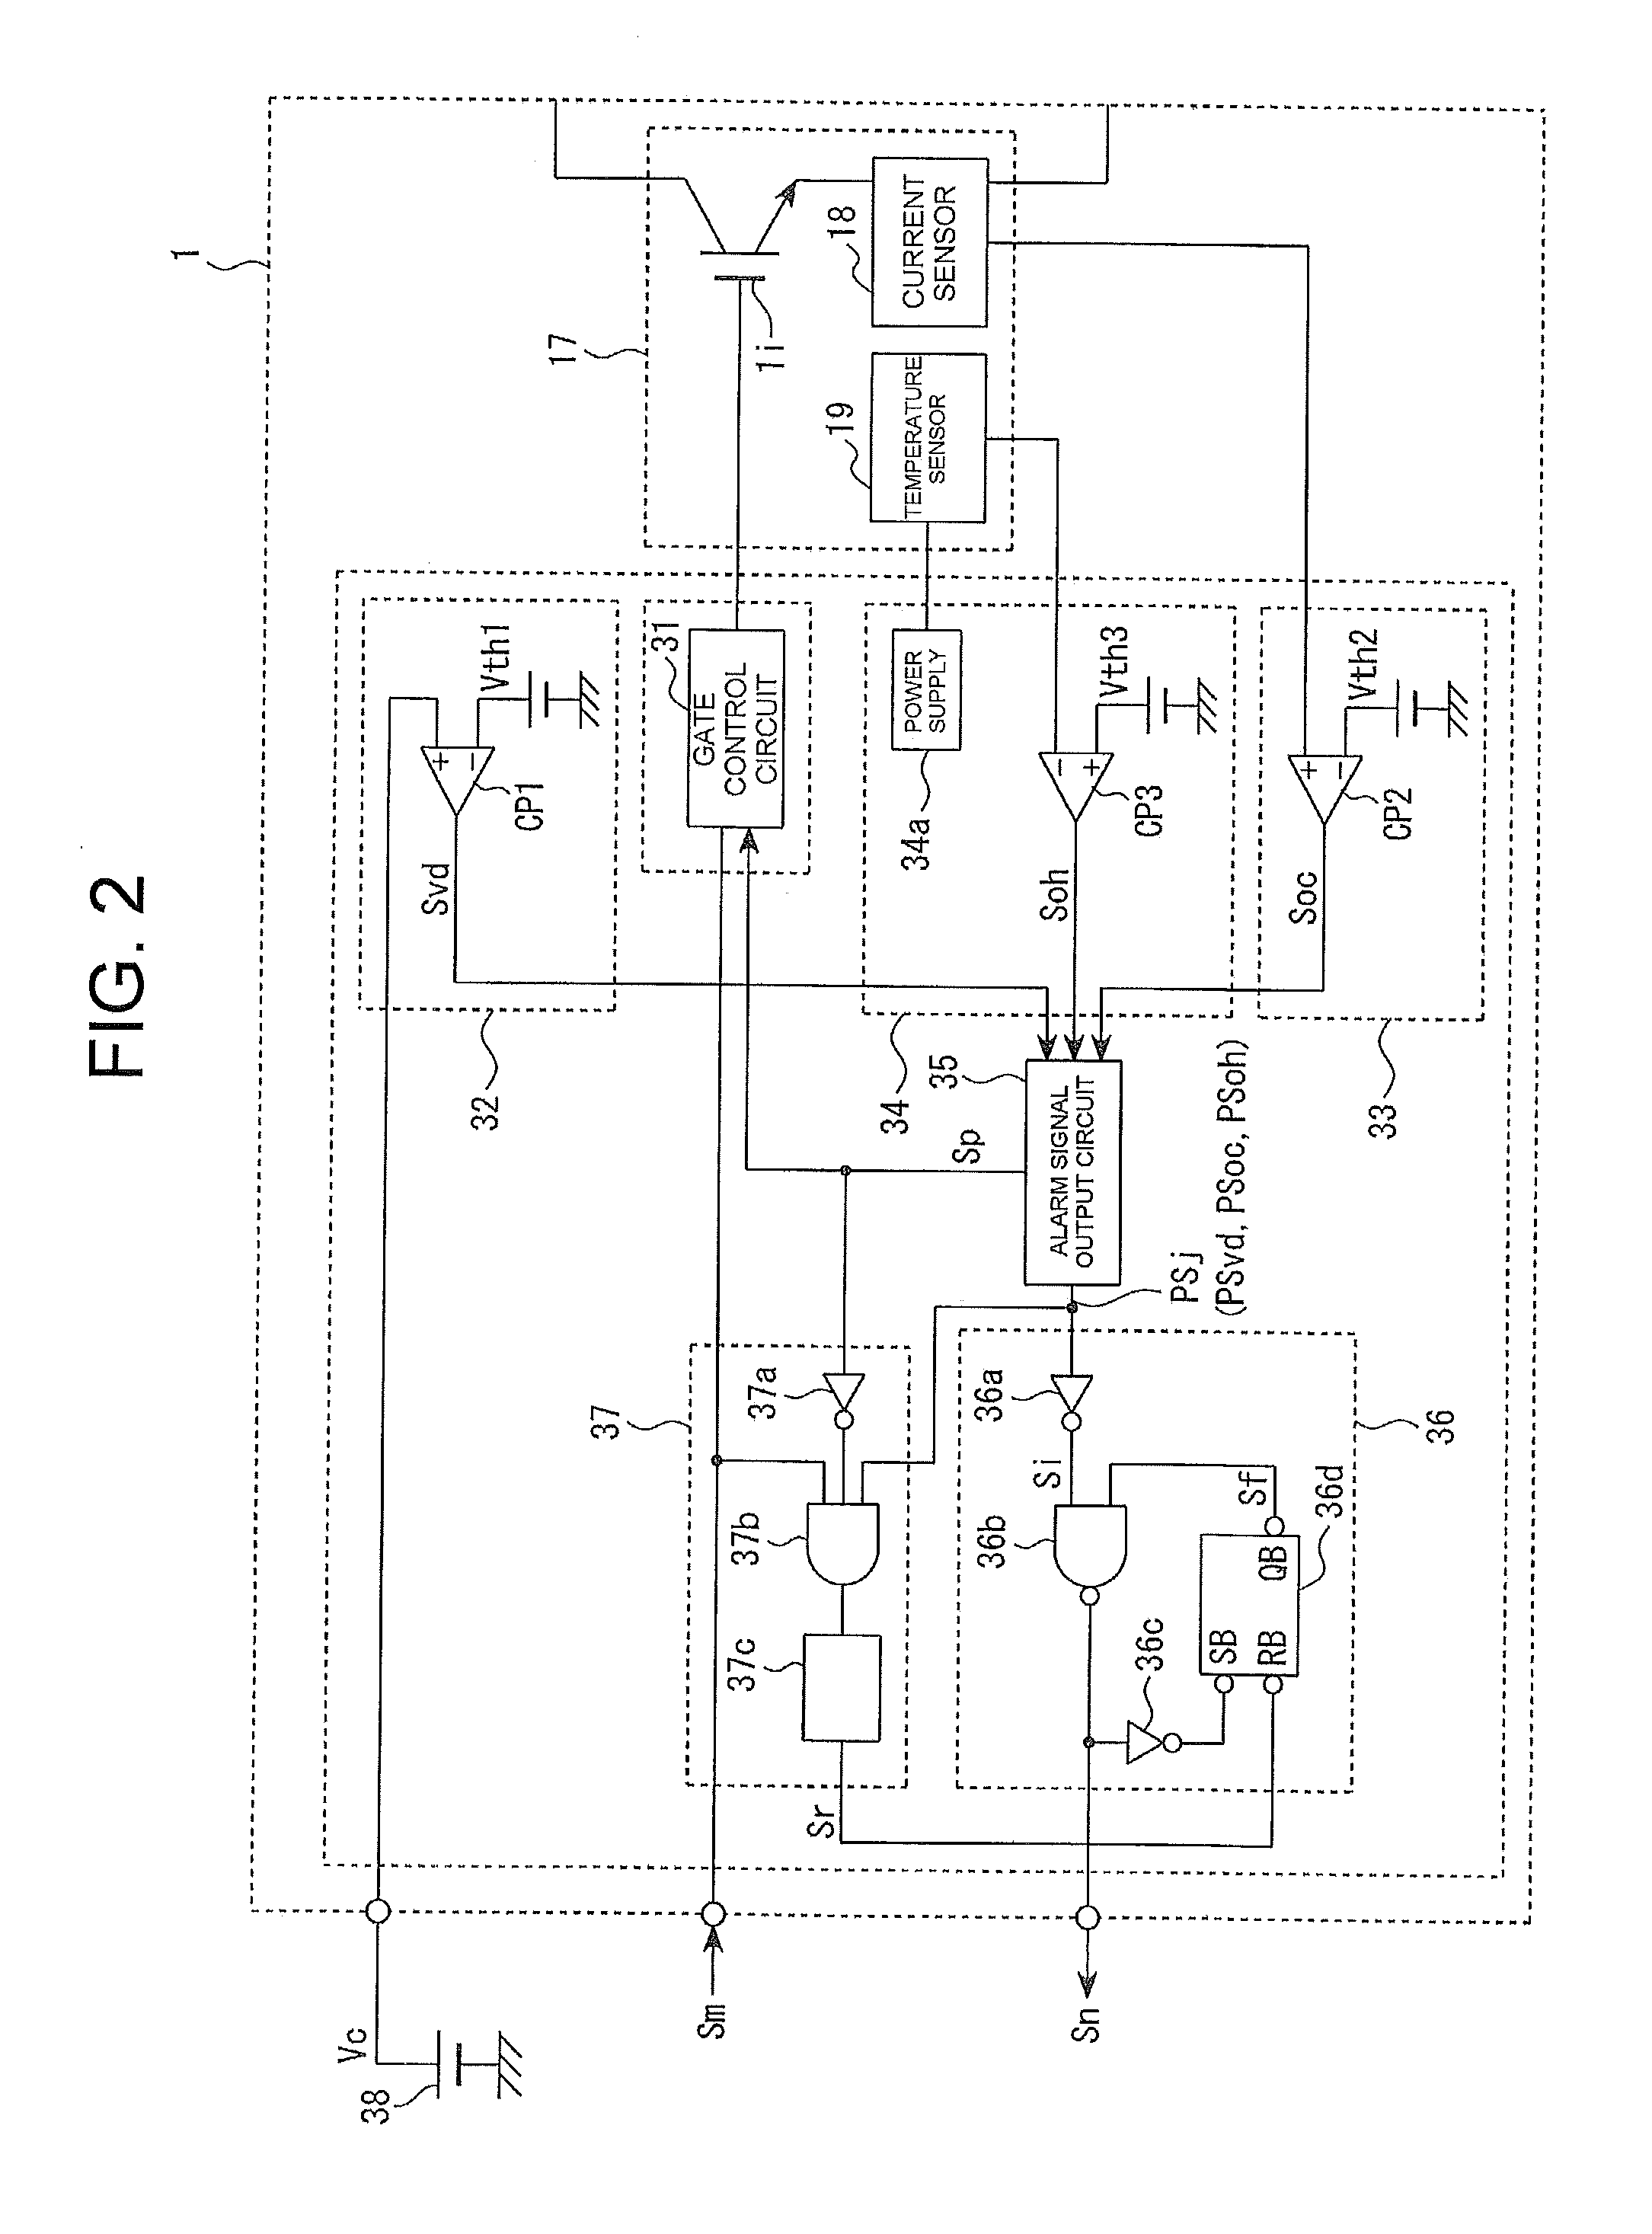 Semiconductor element drive device